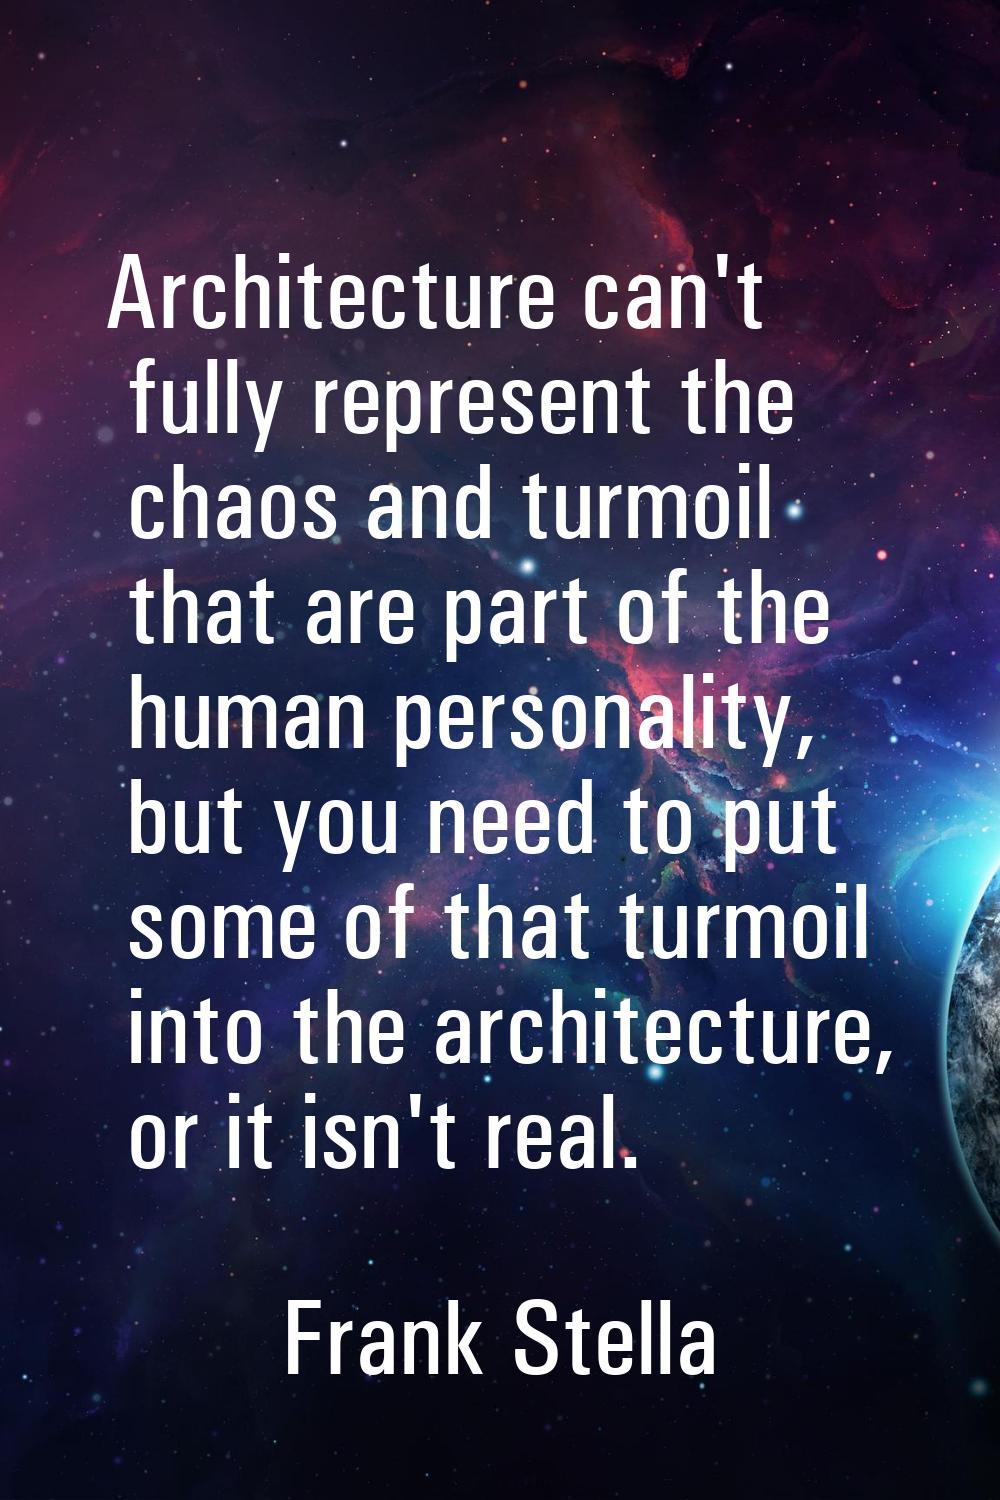 Architecture can't fully represent the chaos and turmoil that are part of the human personality, bu